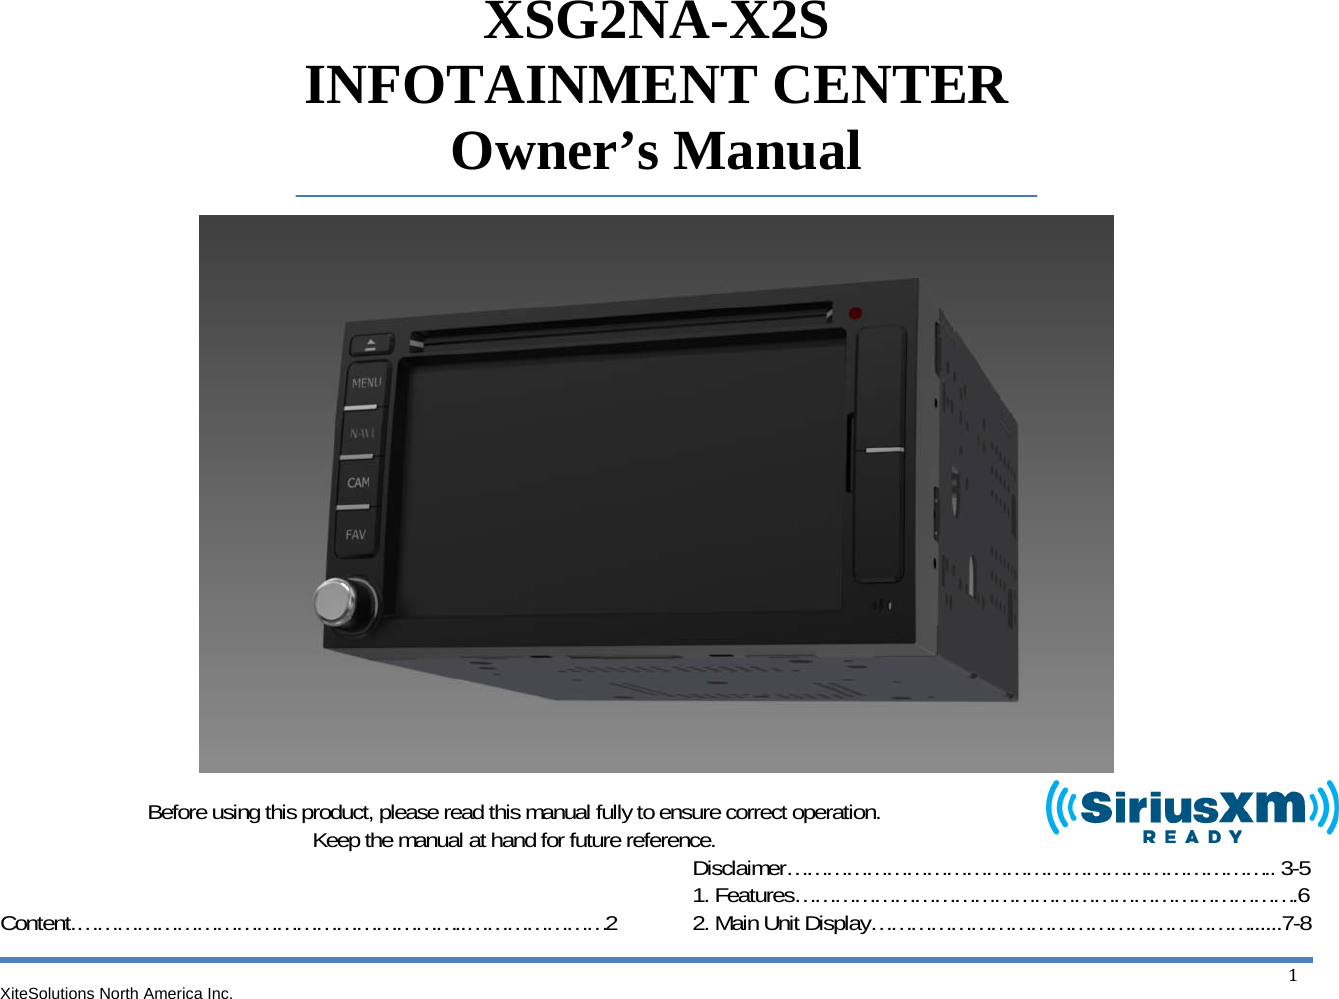 XiteSolutions North America Inc.  1XSG2NA-X2S INFOTAINMENT CENTER Owner’s Manual                       Before using this product, please read this manual fully to ensure correct operation. Keep the manual at hand for future reference.   Content.…………………………………………………..…………………2 Disclaimer……………………………………………………………….. 3-5 1. Features………………………………………………………………….6 2. Main Unit Display…………………………………………………......7-8 